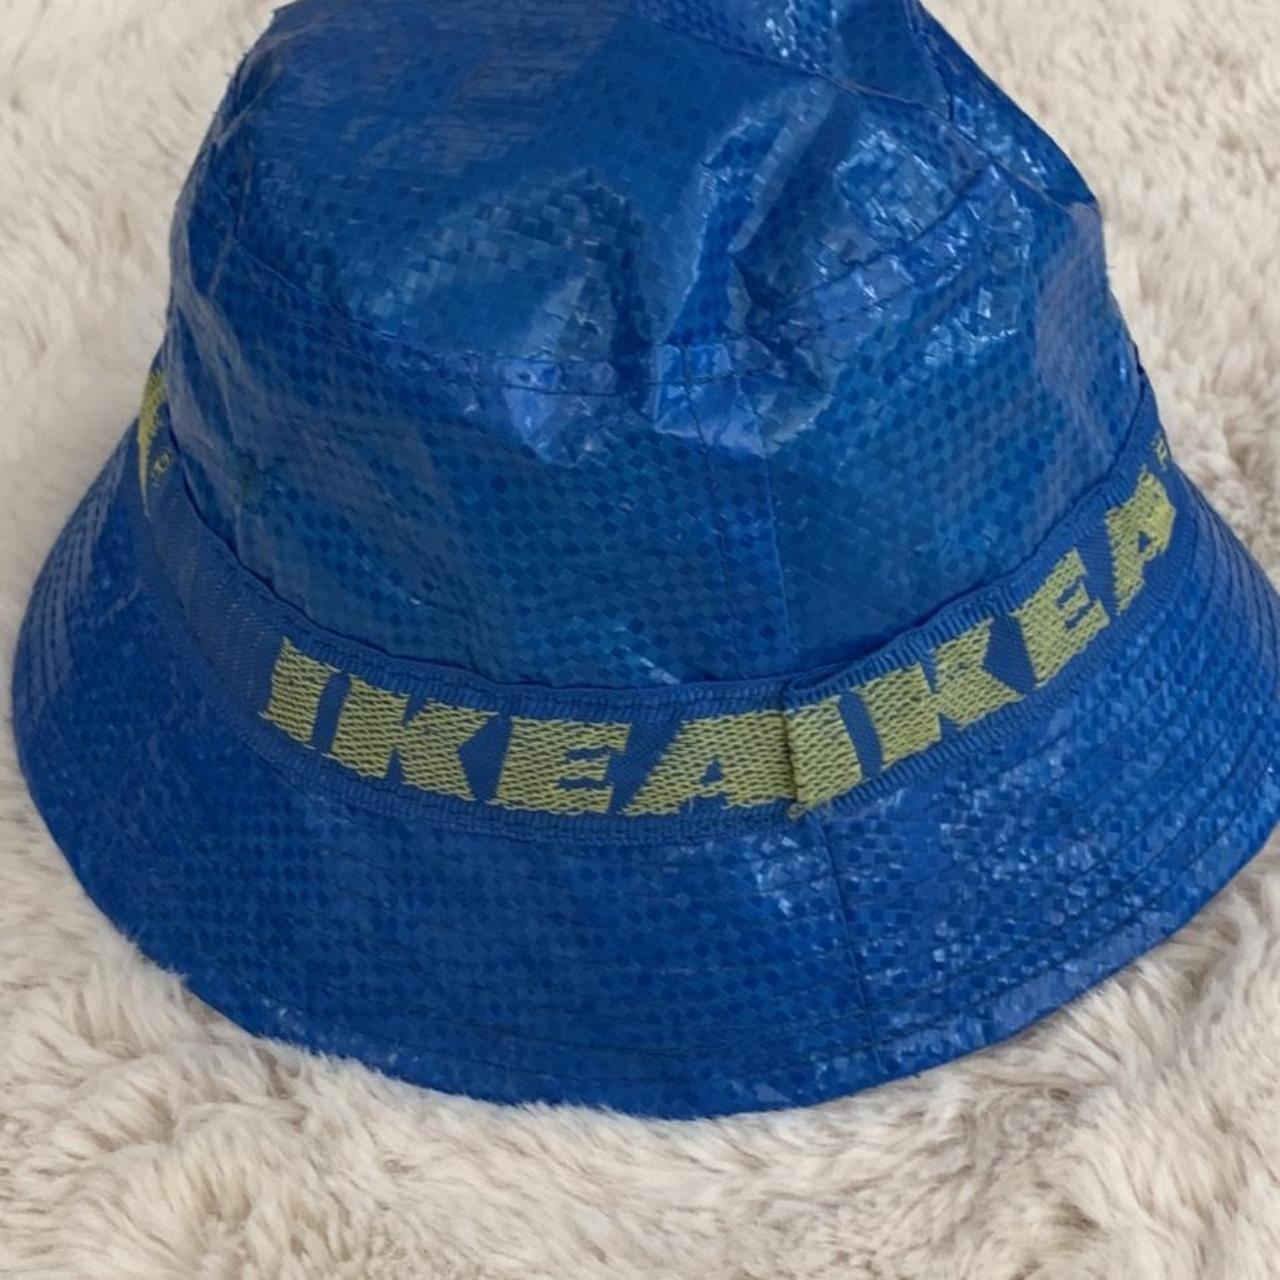 IKEA Women's Yellow and Blue Hat (3)